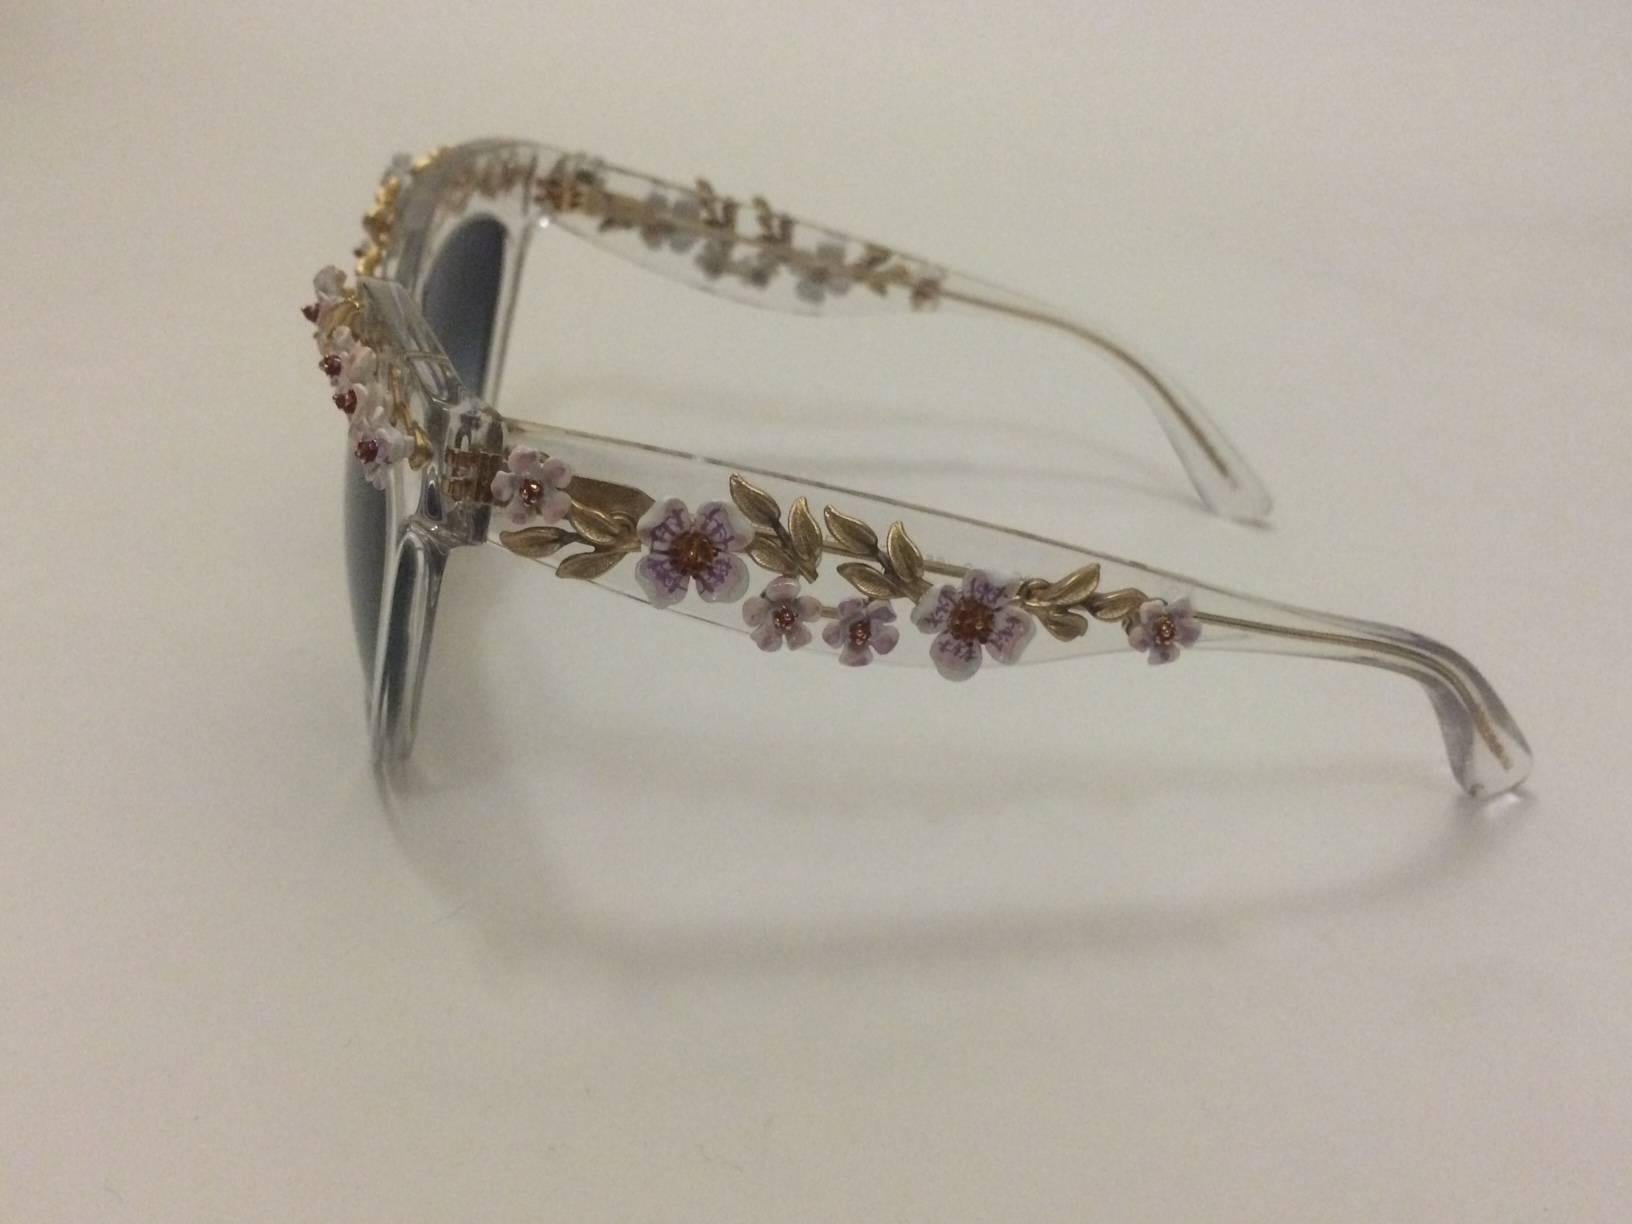 Gray Dolce & Gabbana Rare Clear Transparent Sunglasses with Floral Vine Metalwork